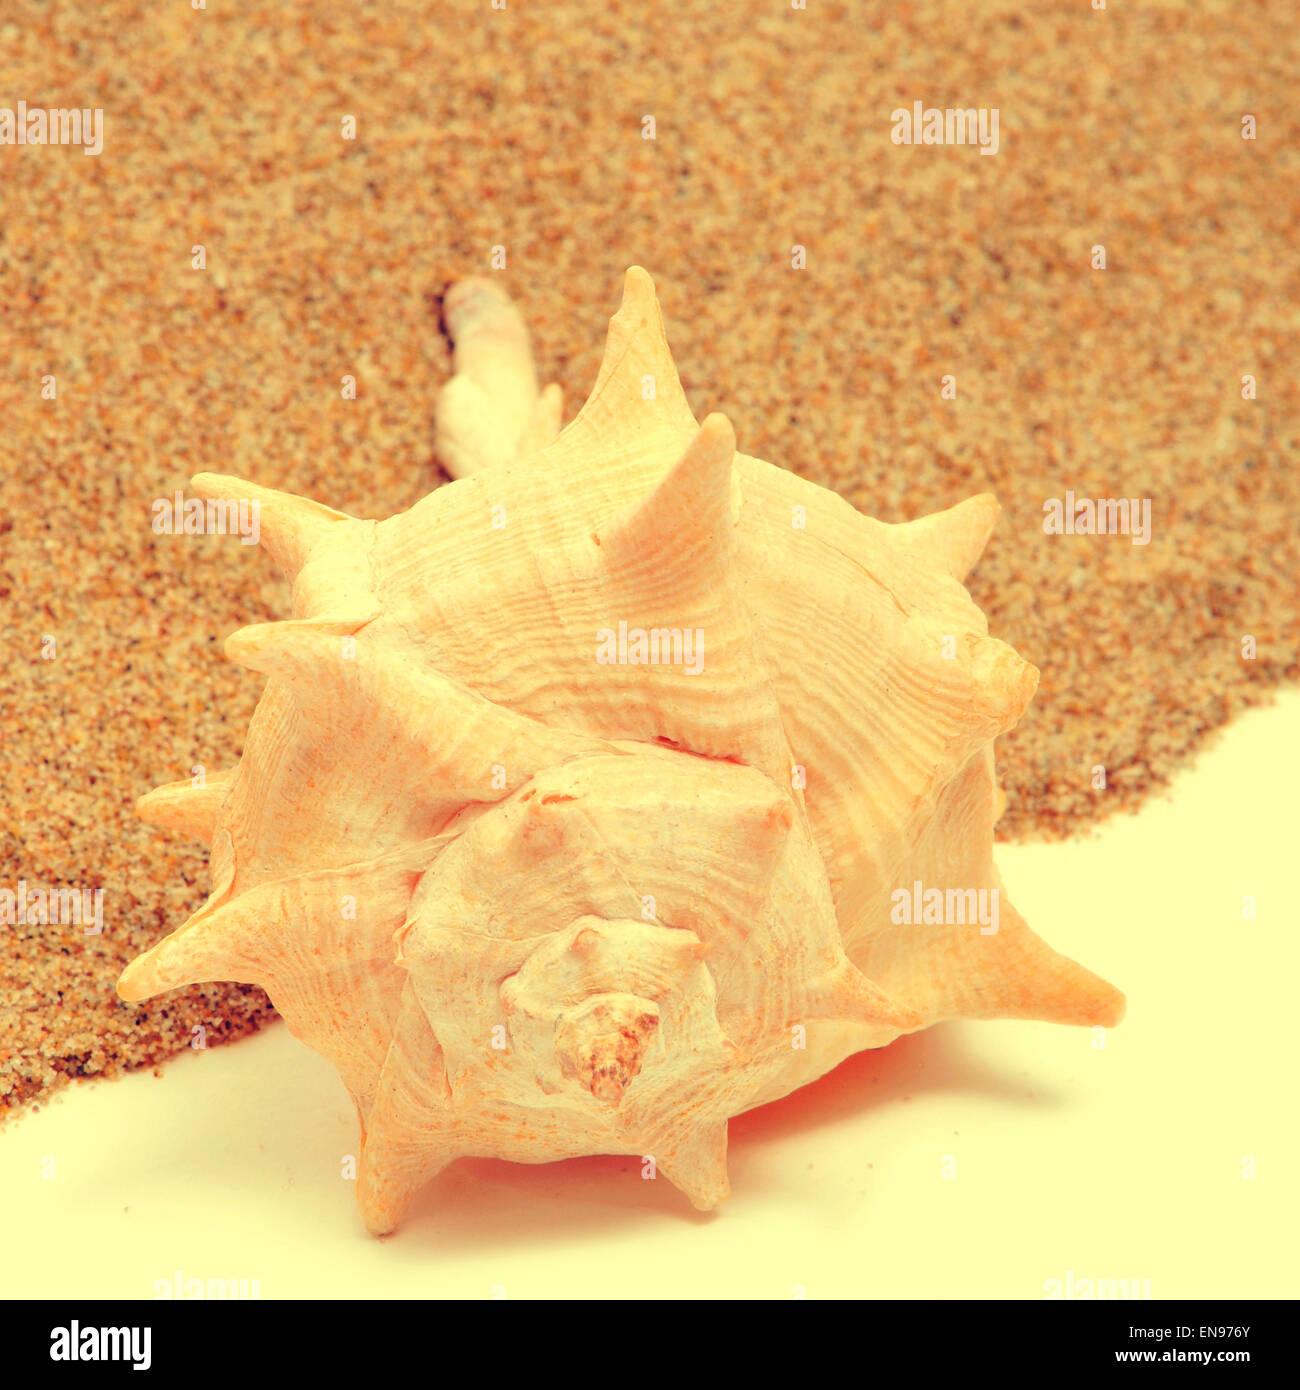 closeup of a seashell on the sand with a retro effect Stock Photo